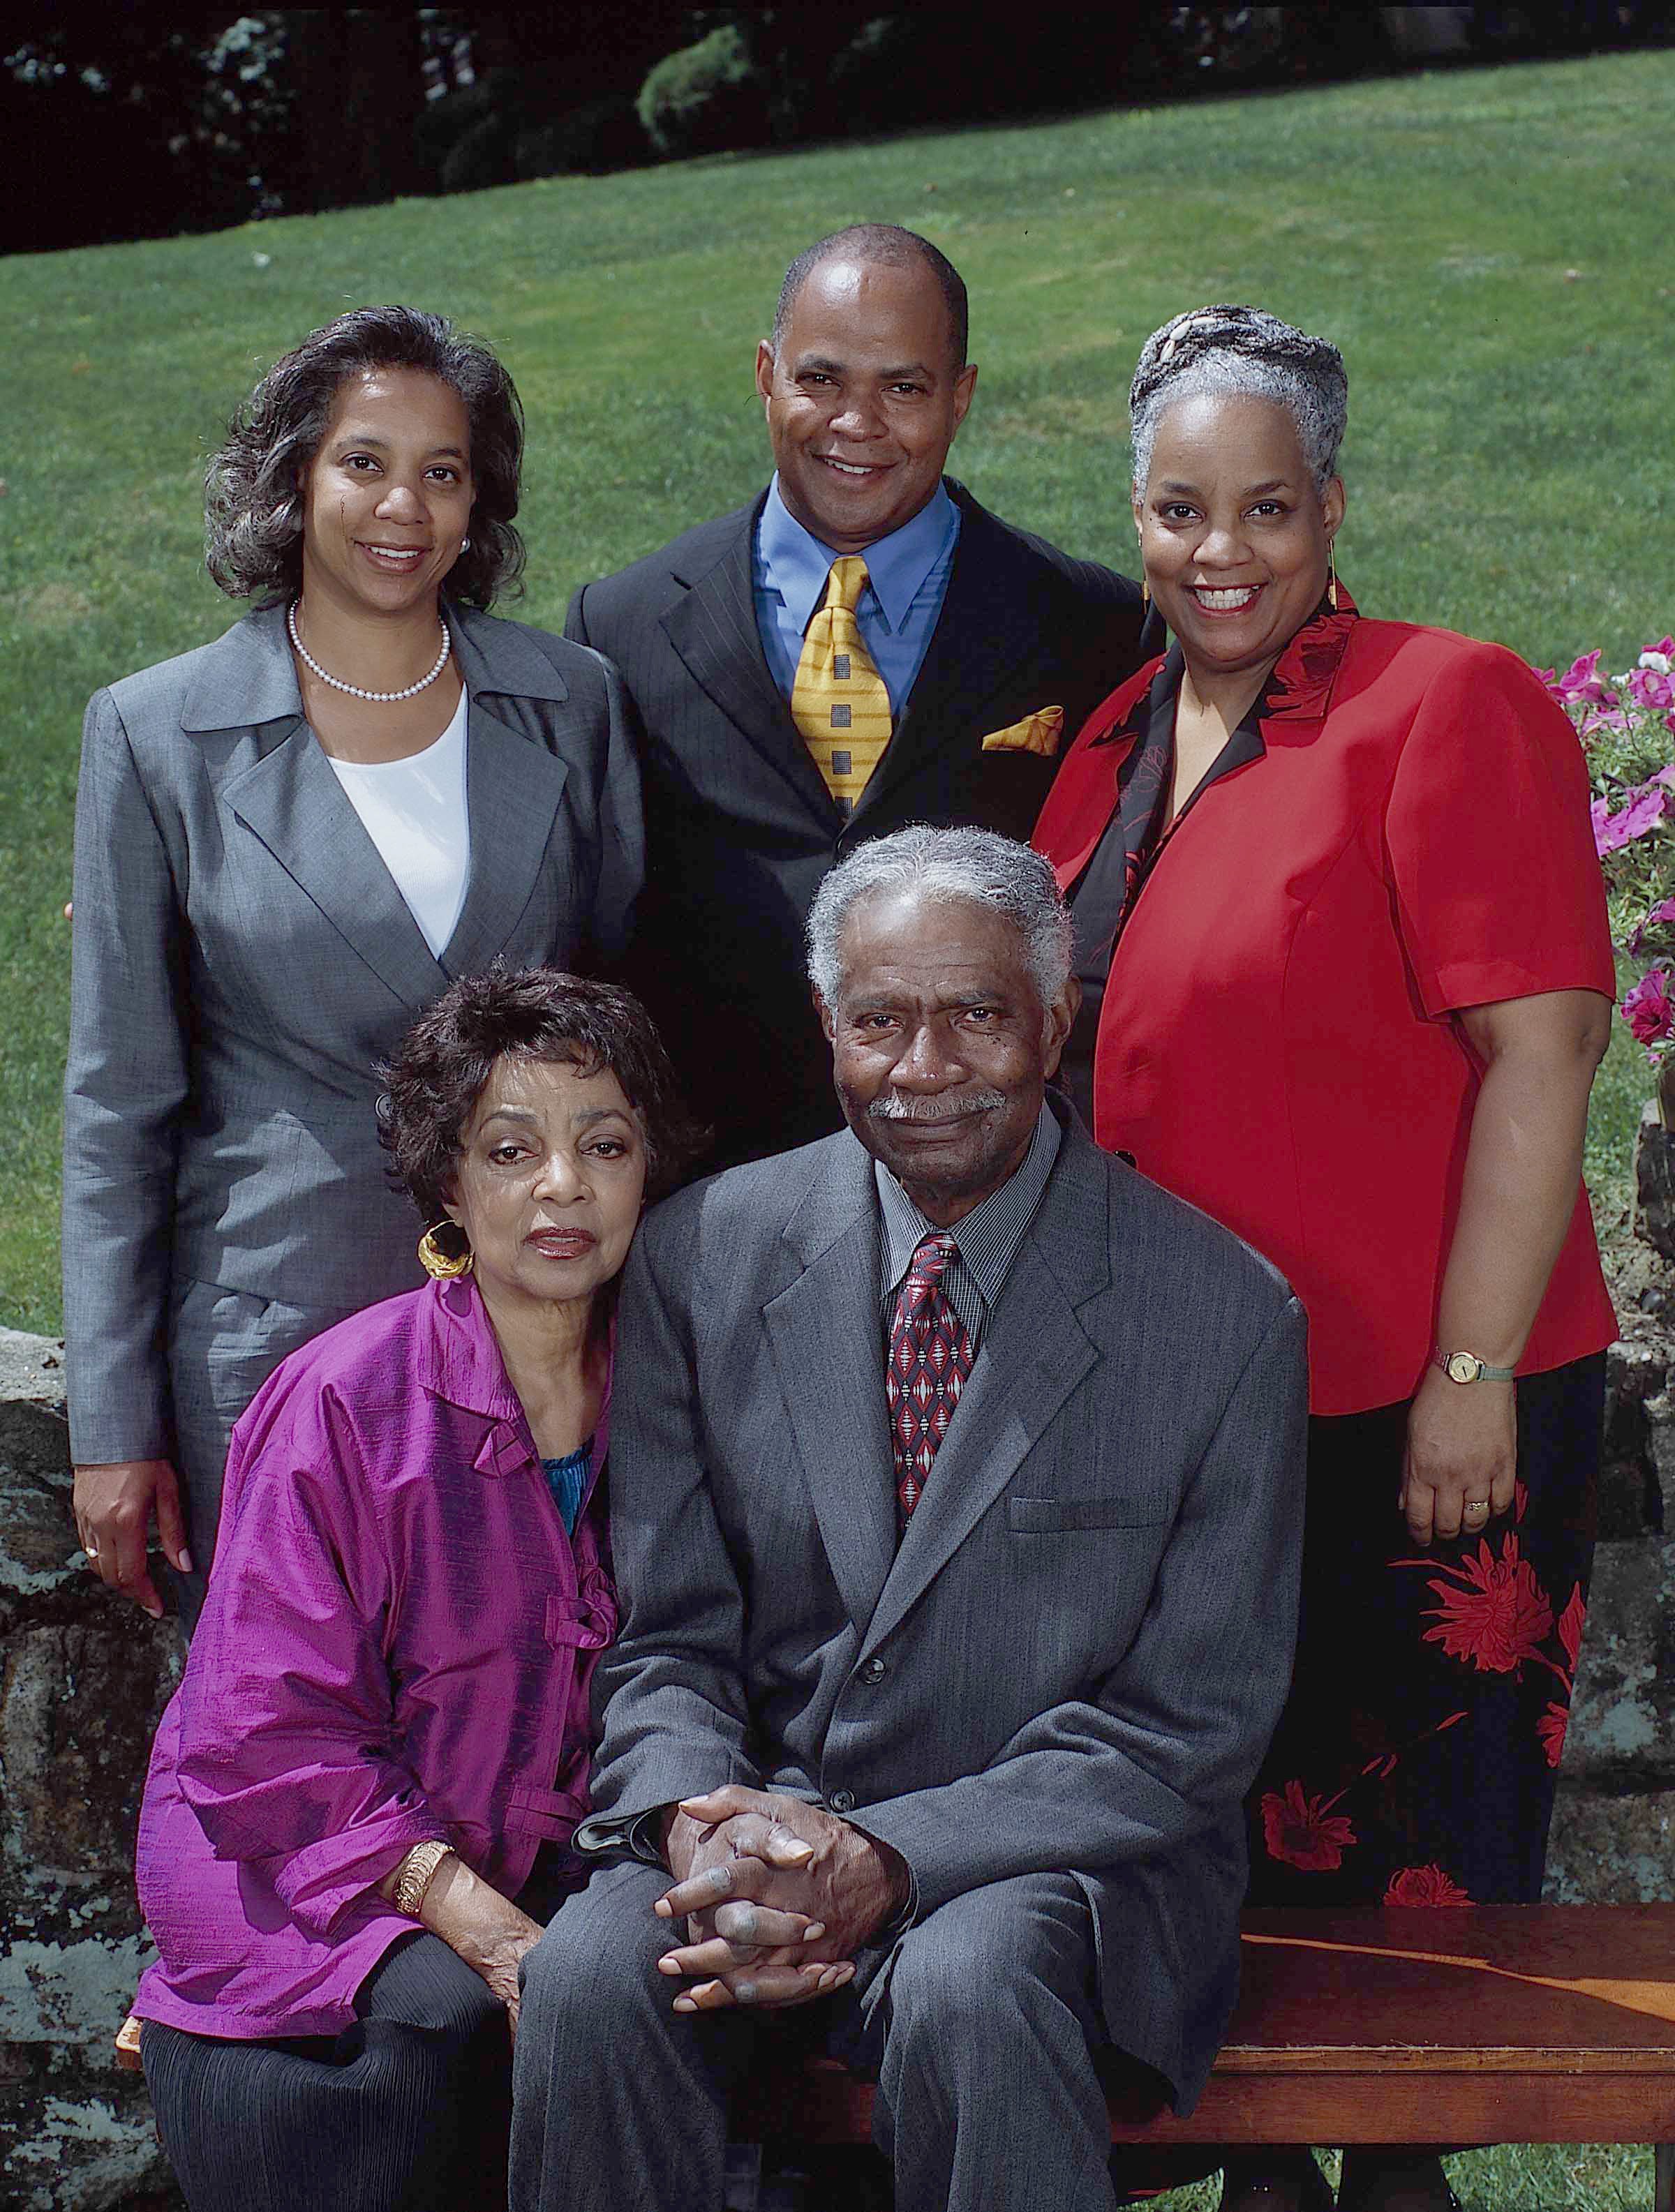 Portrait of married American actors and Civil Rights activists Ruby Dee and Ossie Davis as they pose outdoors with their children, late 1990s or early 2000s.  | Photo: Getty Images